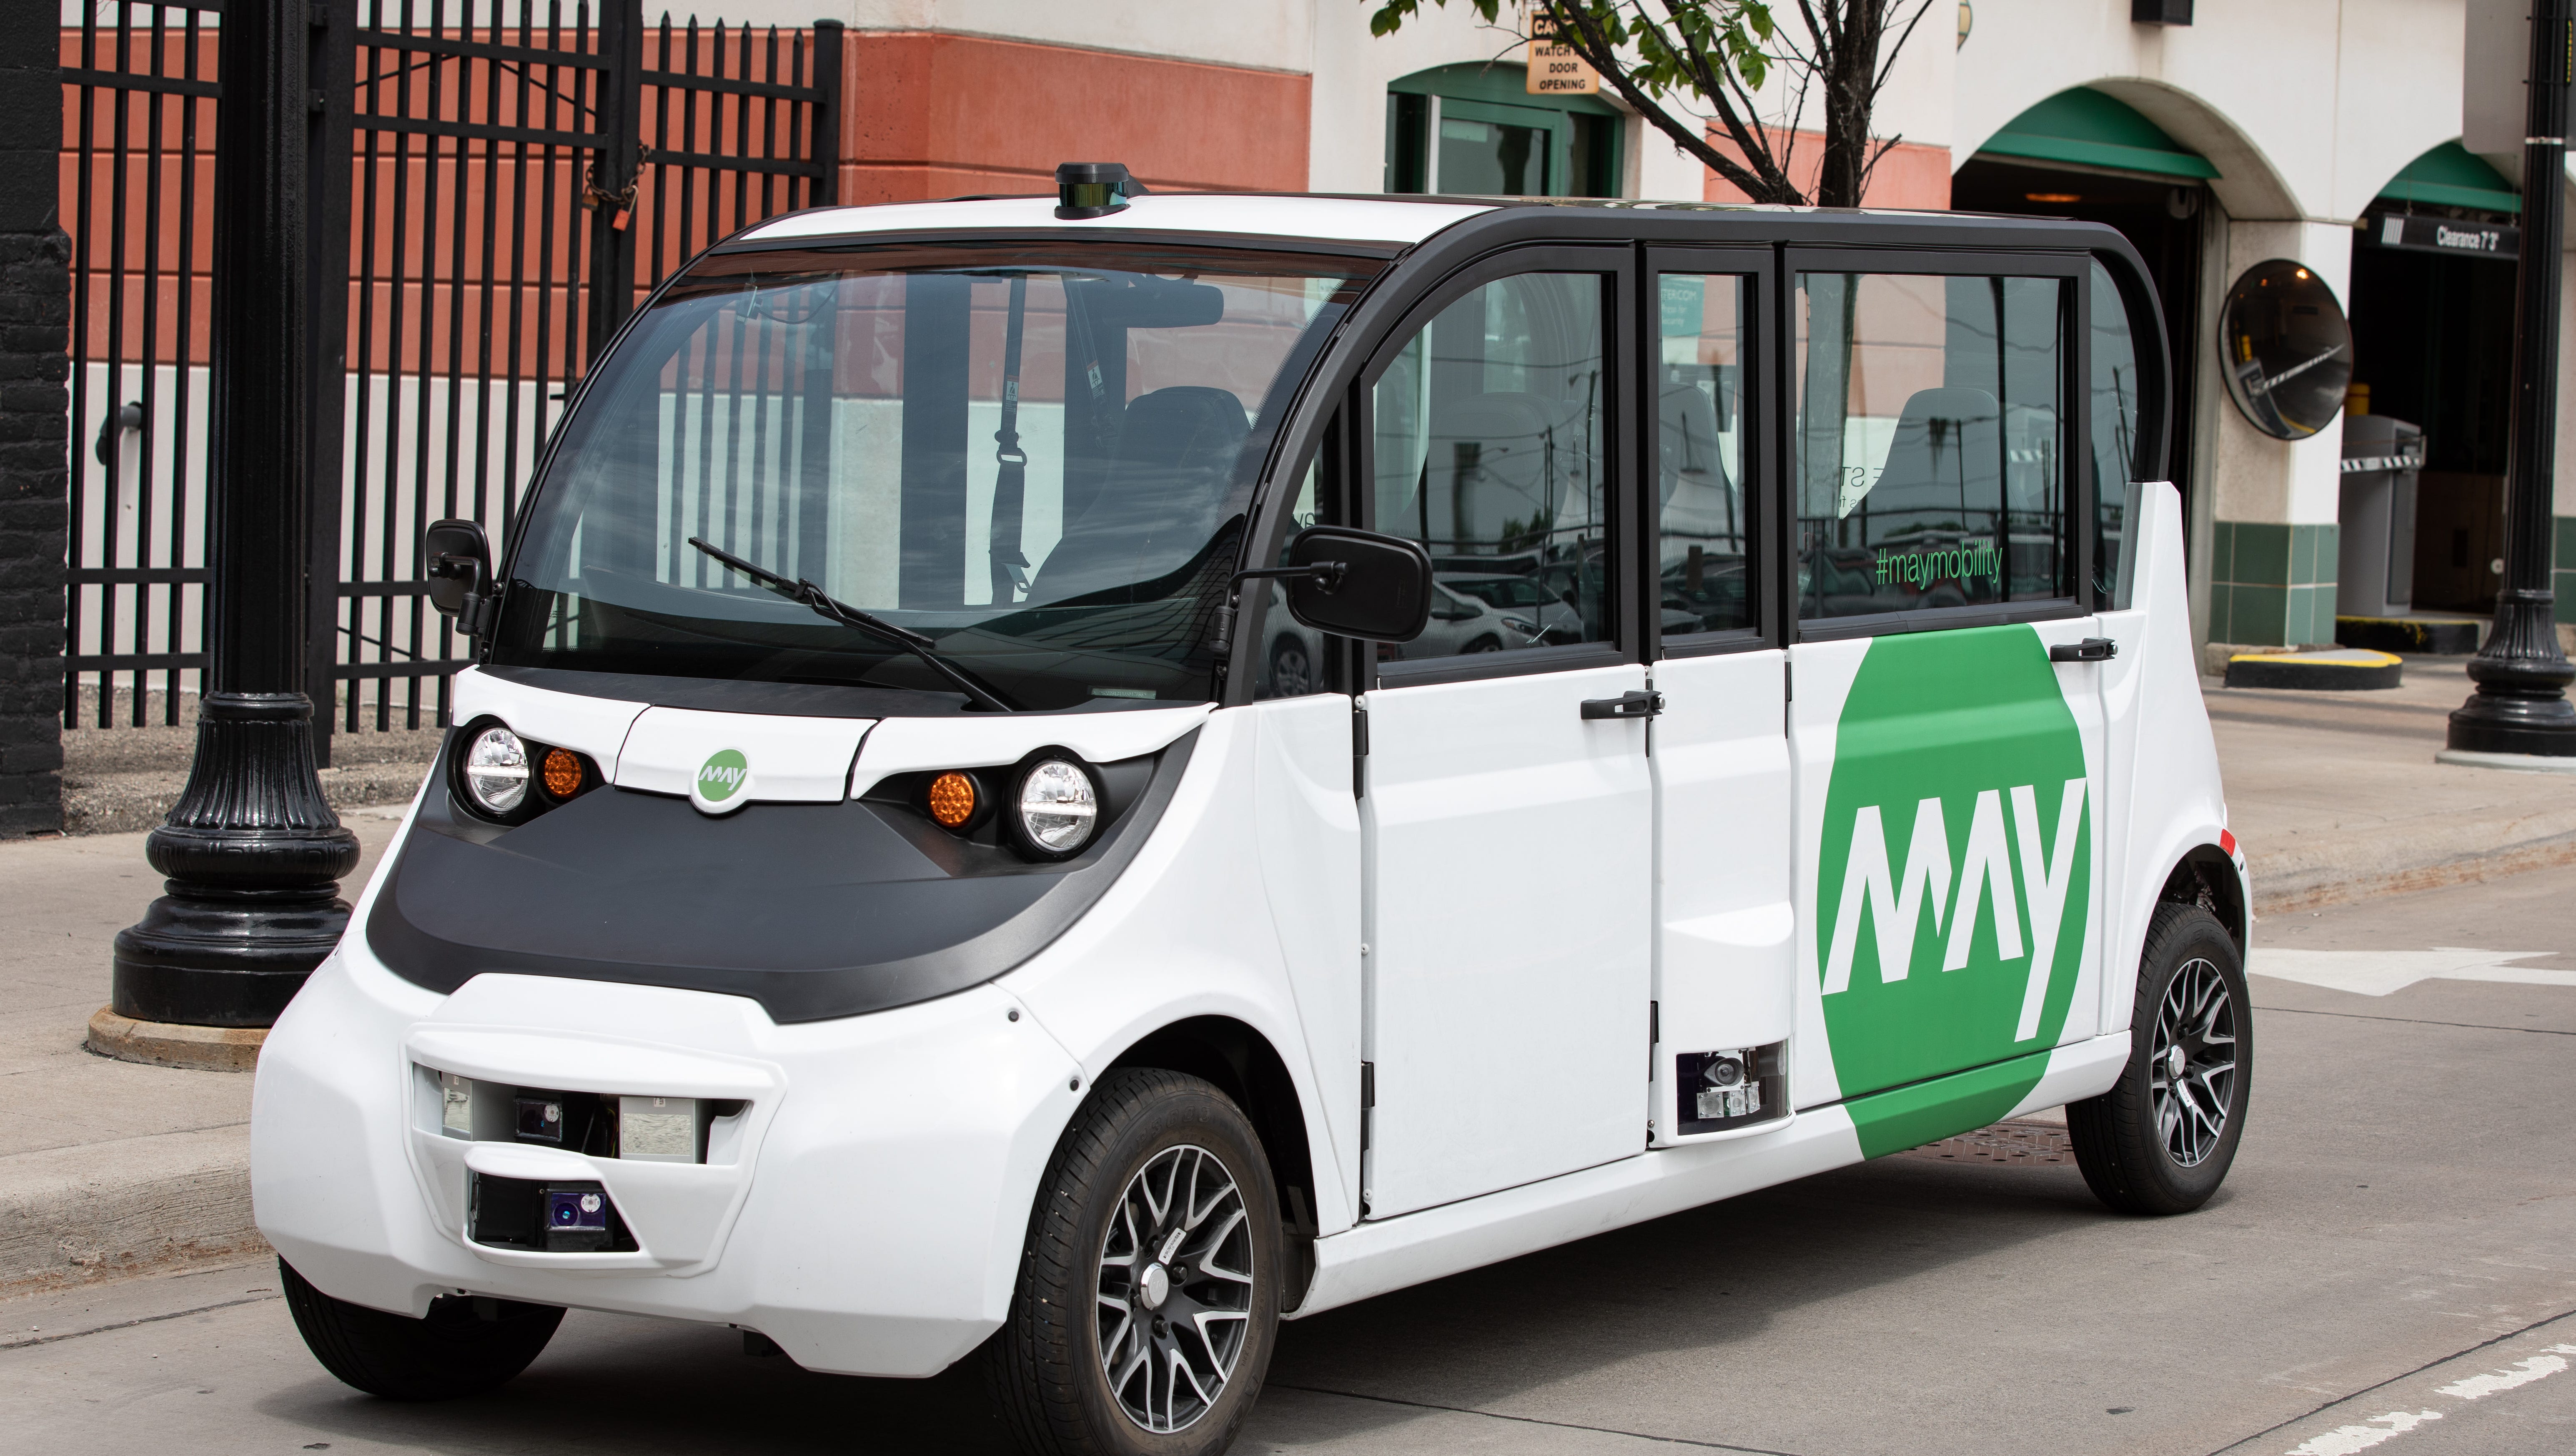 May Mobility is launching a fleet of five autonomous electric shuttles in downtown Detroit on Tuesday for Bedrock employees.